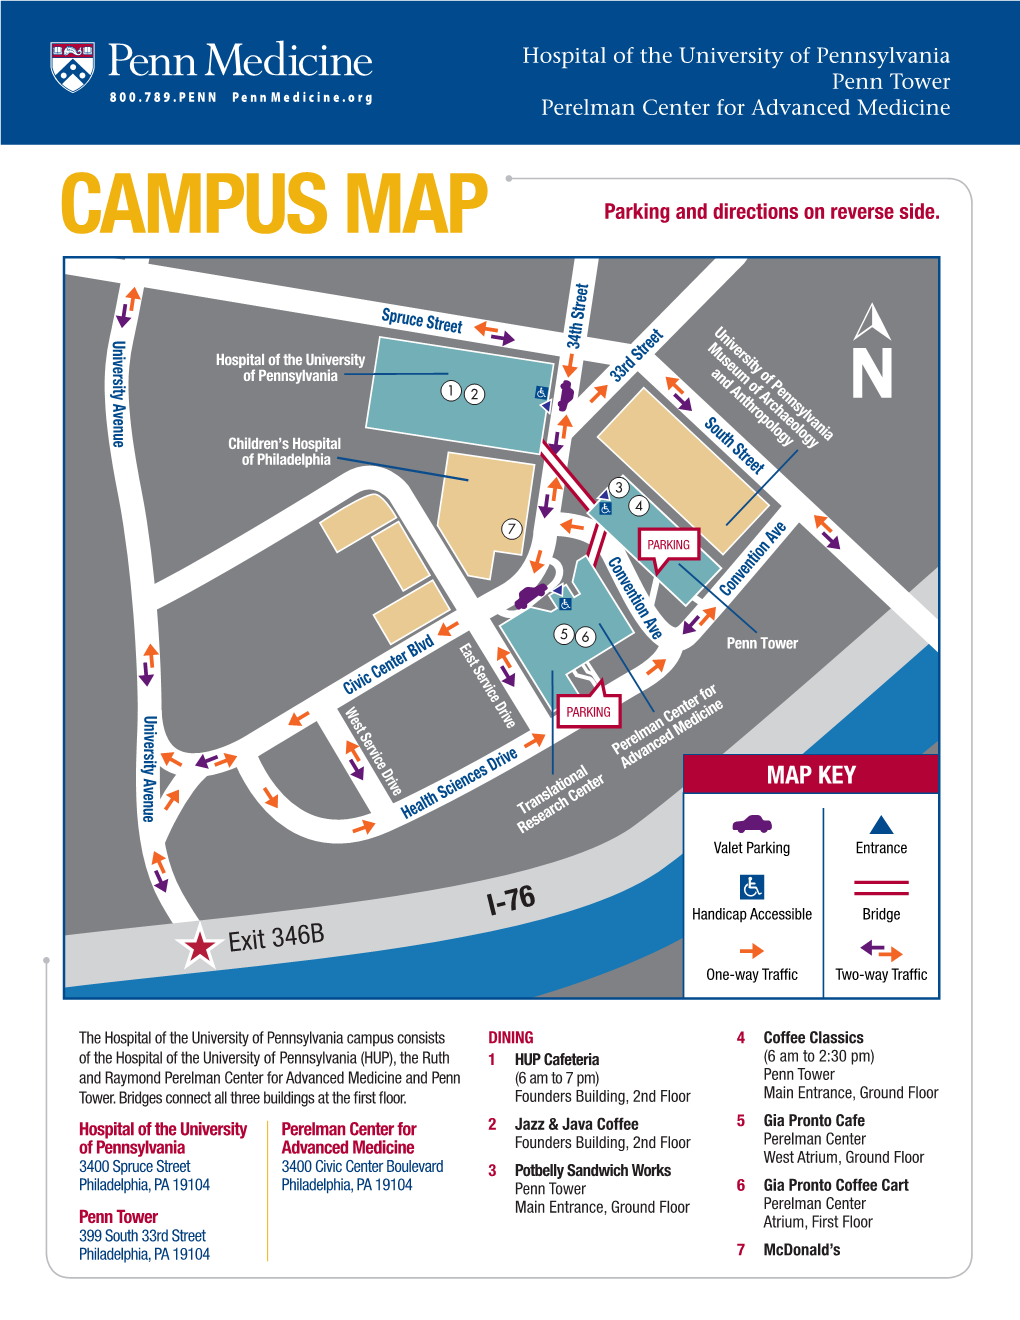 CAMPUS MAP Parking and Directions on Reverse Side